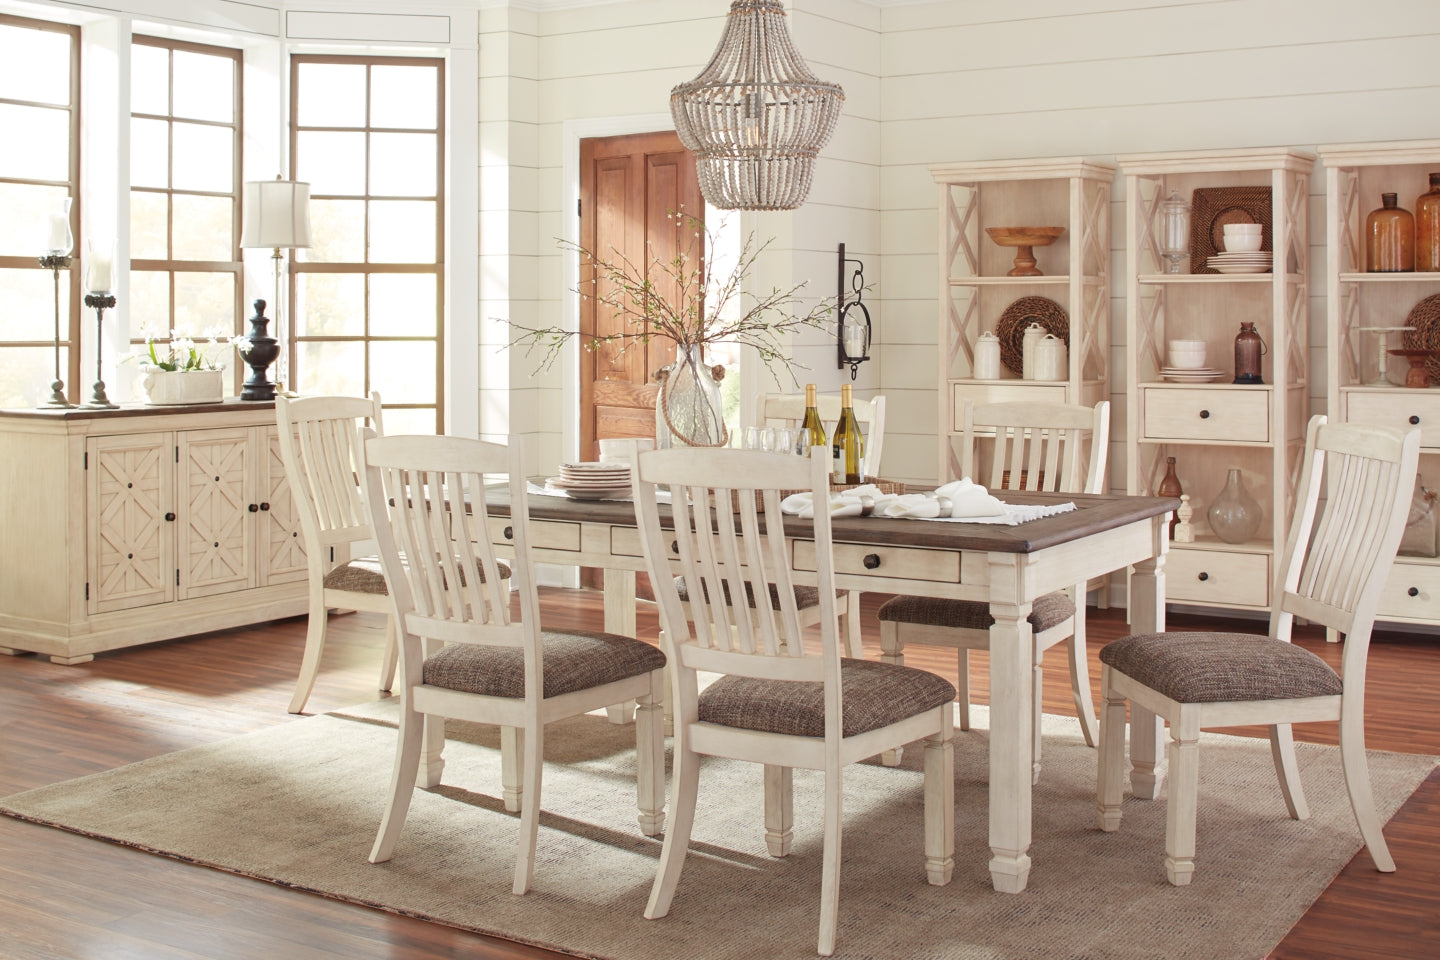 Bolanburg Dining Table and 6 Chairs - PKG000175